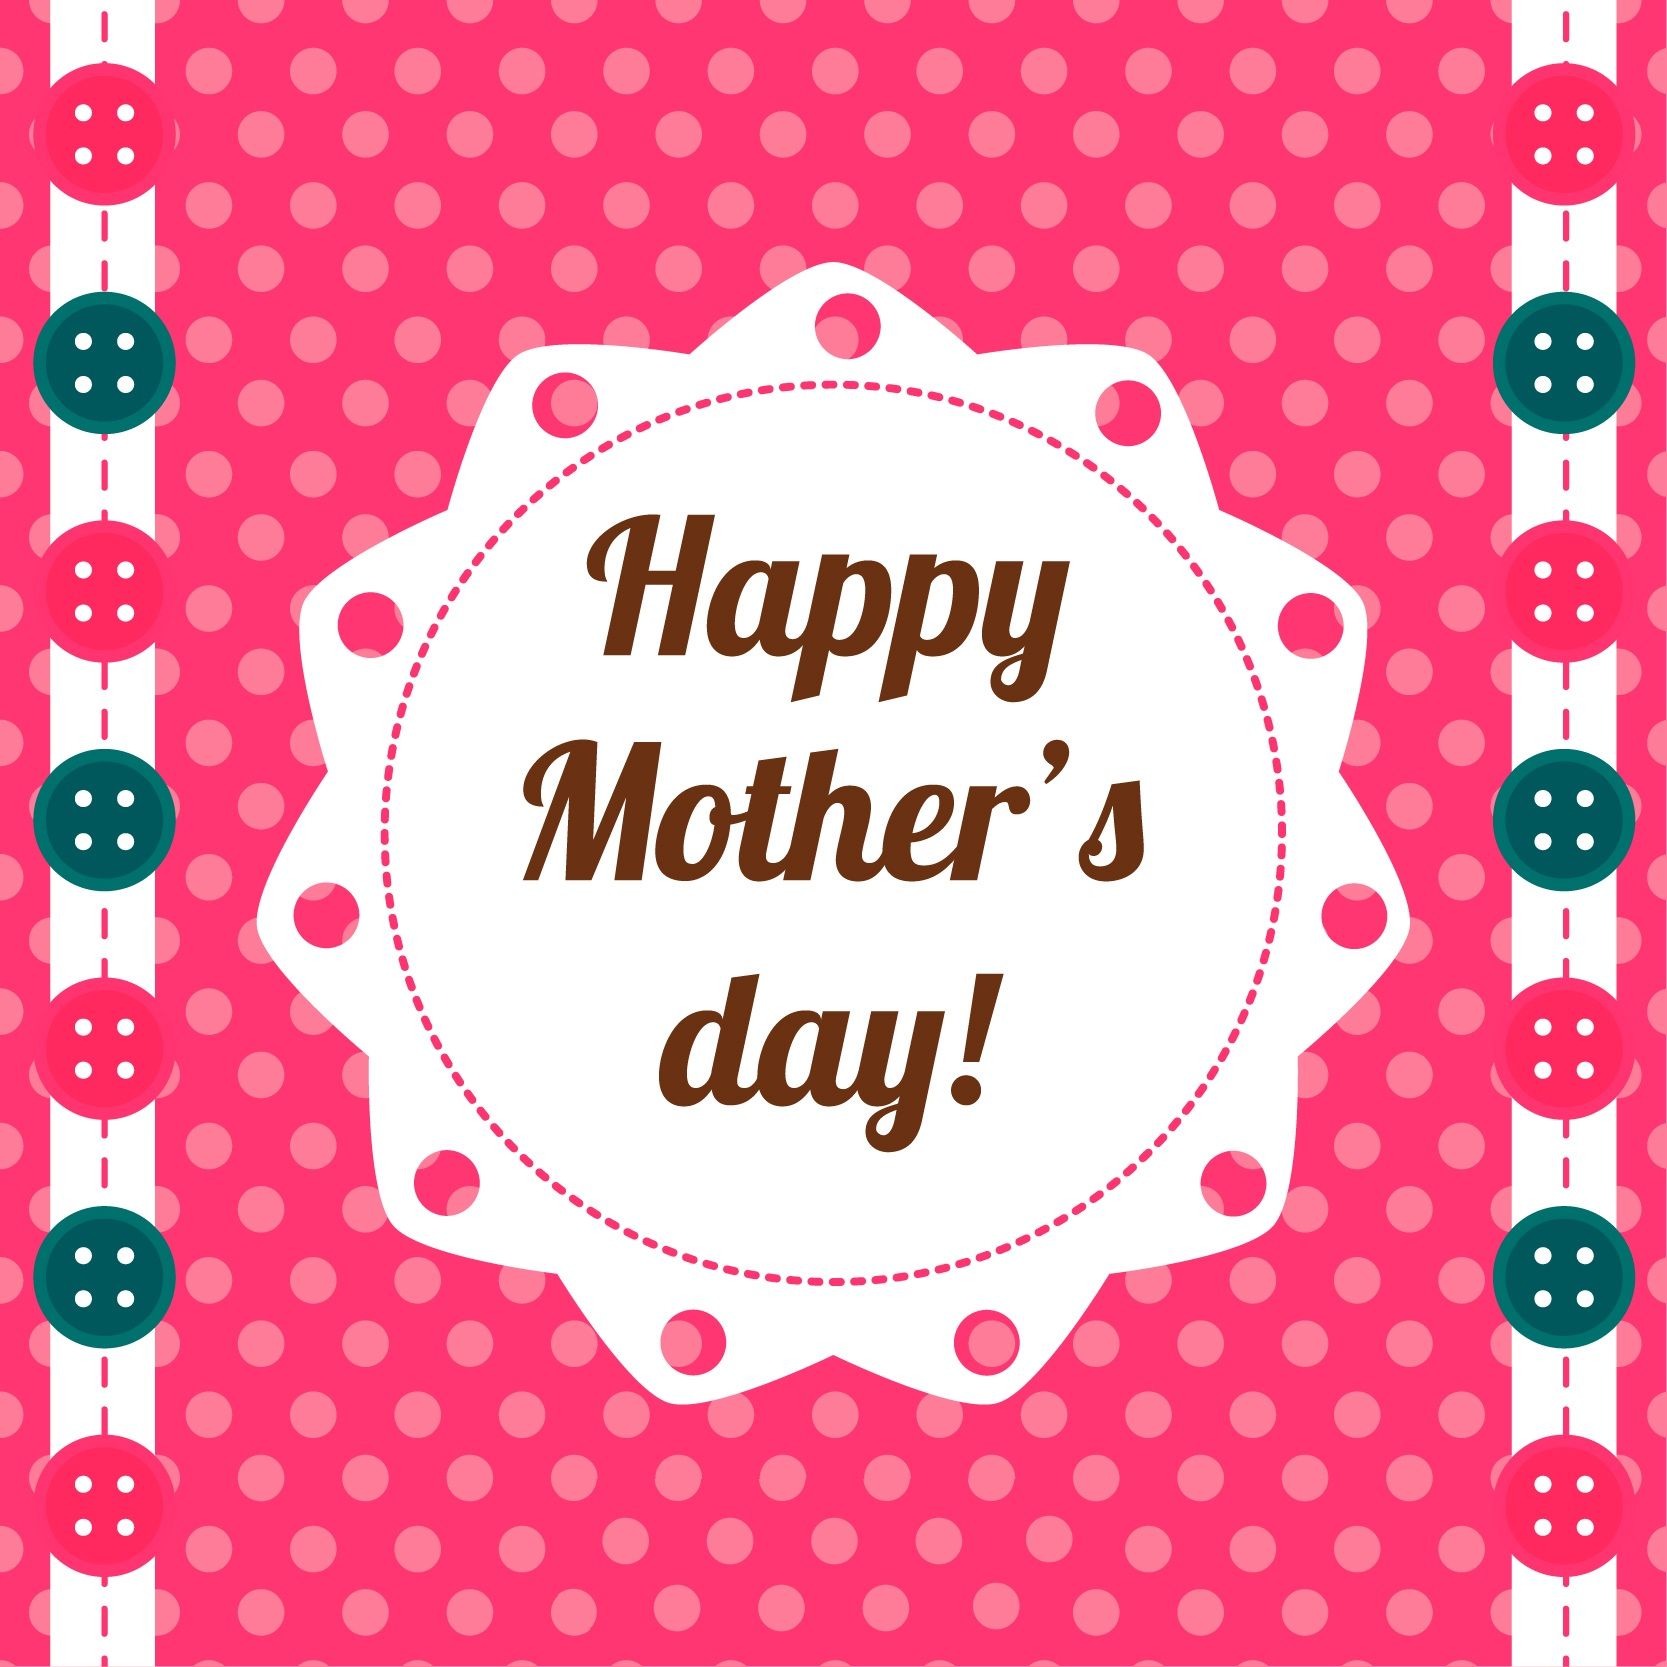 Beautiful Mothers Day HD Wallpaper 1080p. Happy mothers day poem